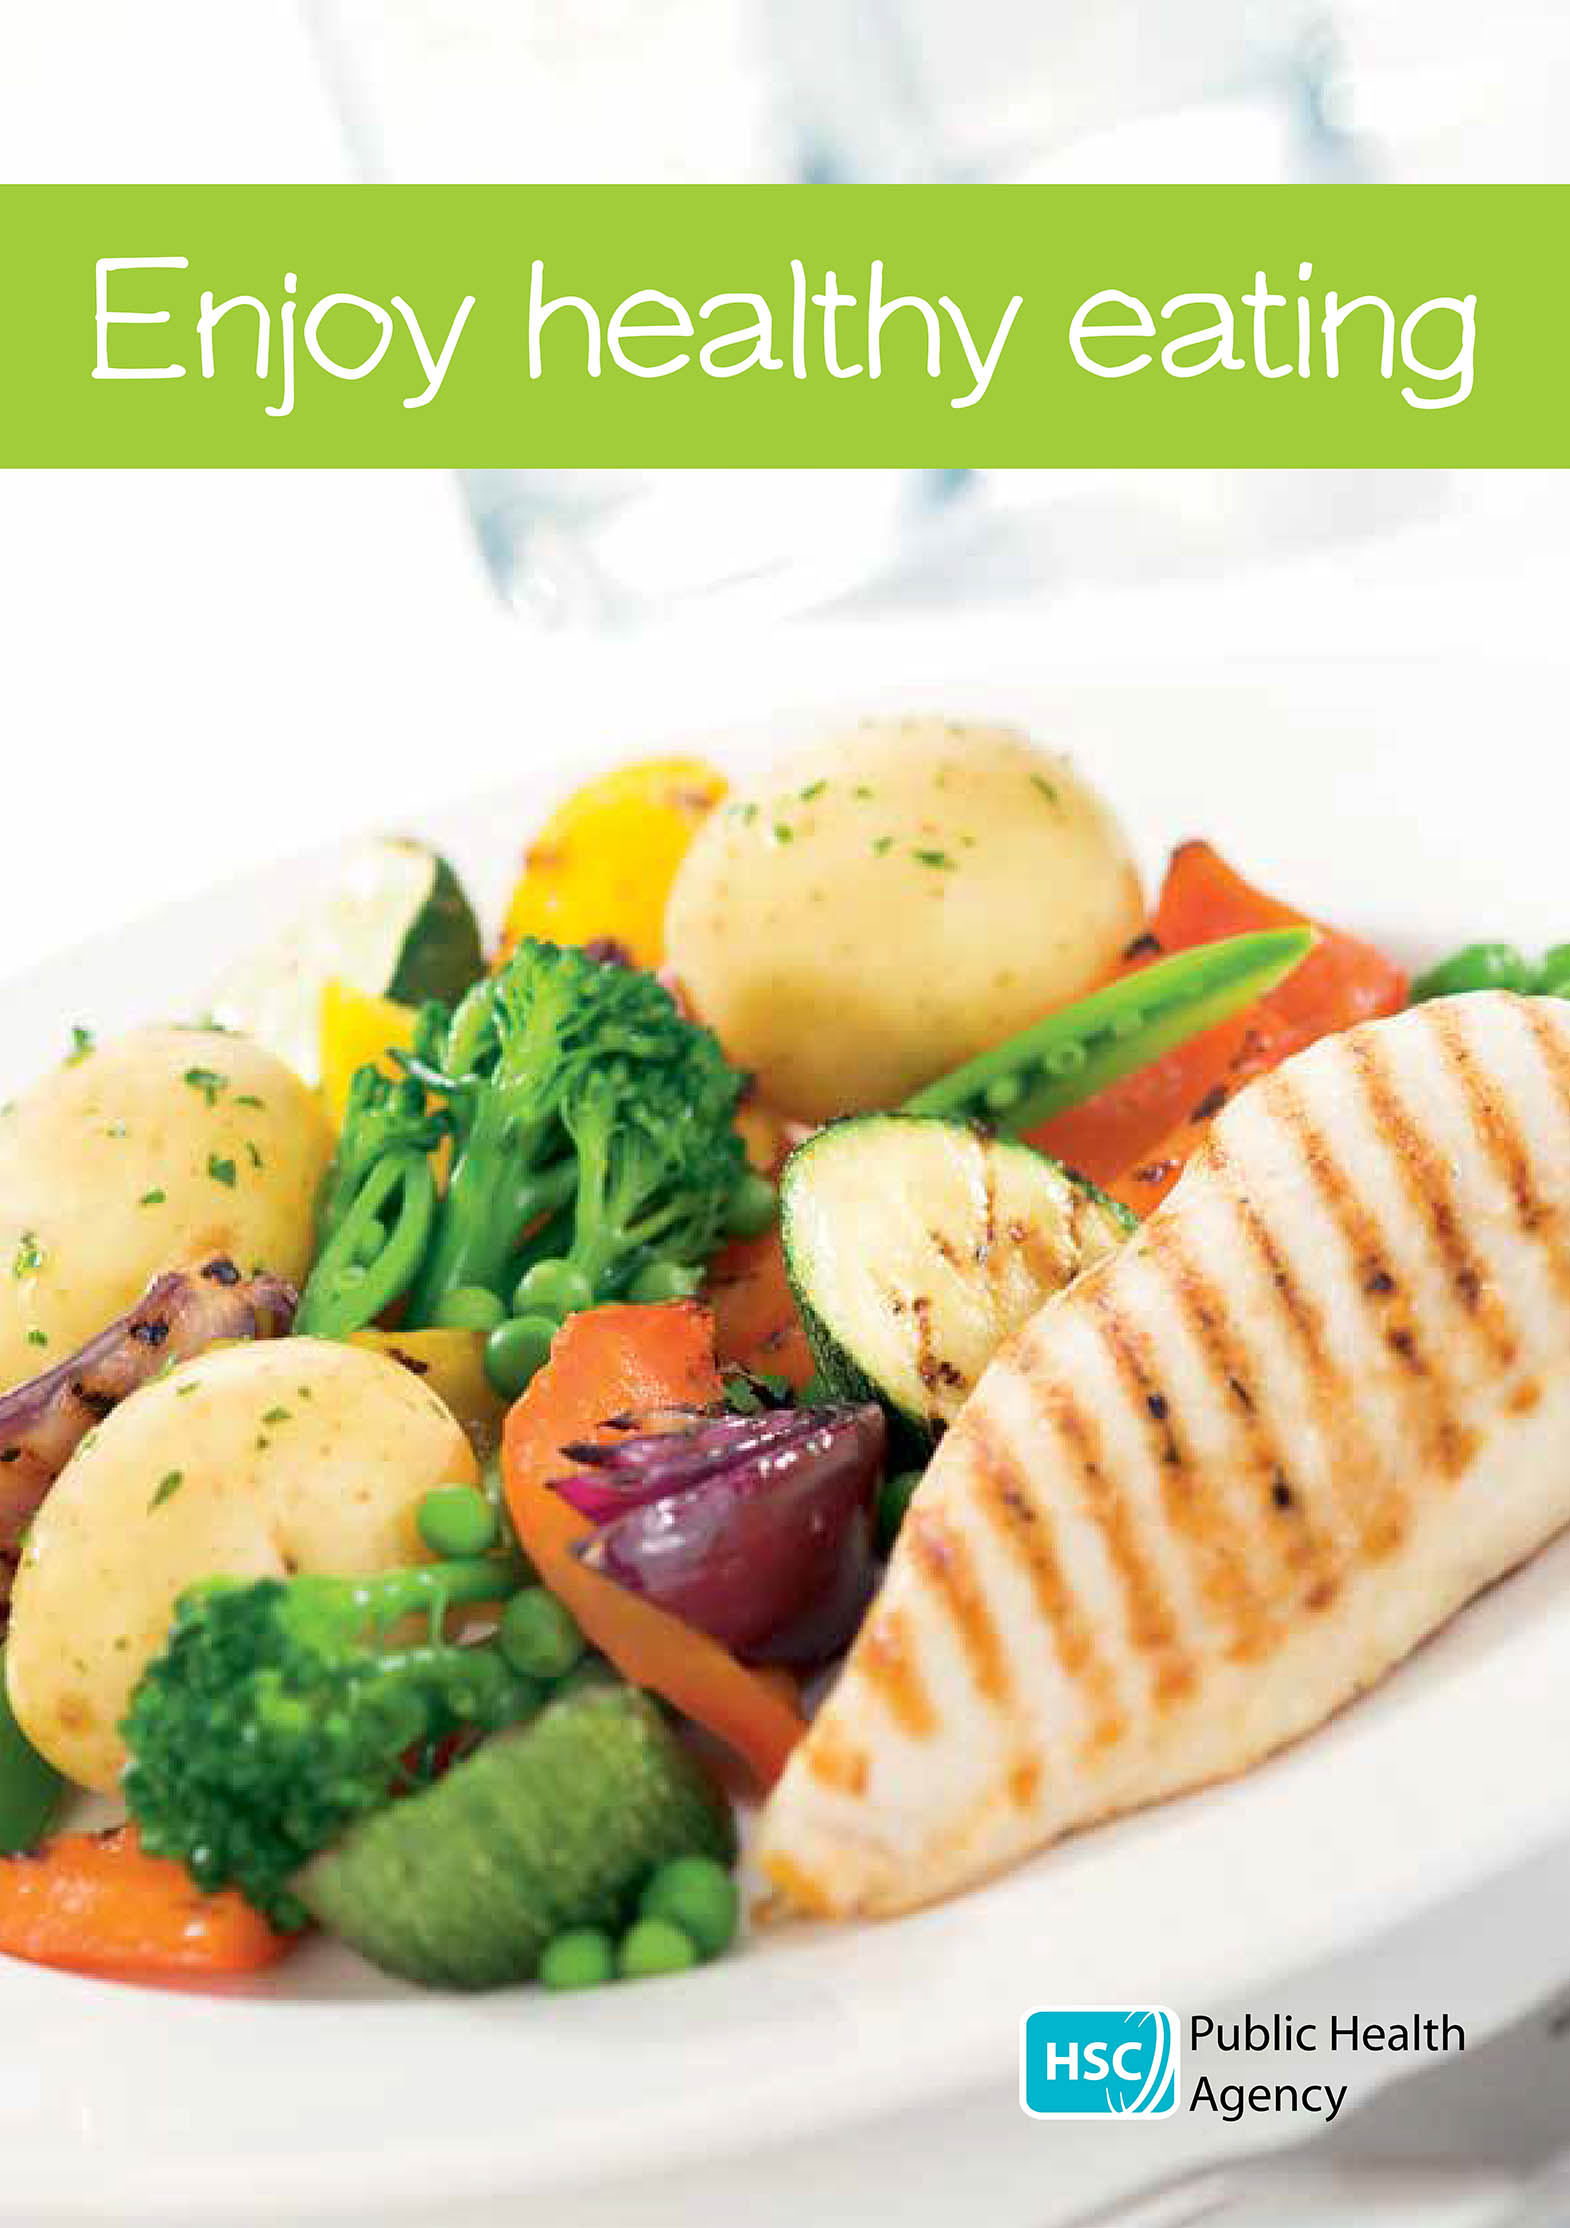 Enjoy healthy eating leaflet cover showing a plate of grilled chicken, vegetables and boiled potatoes